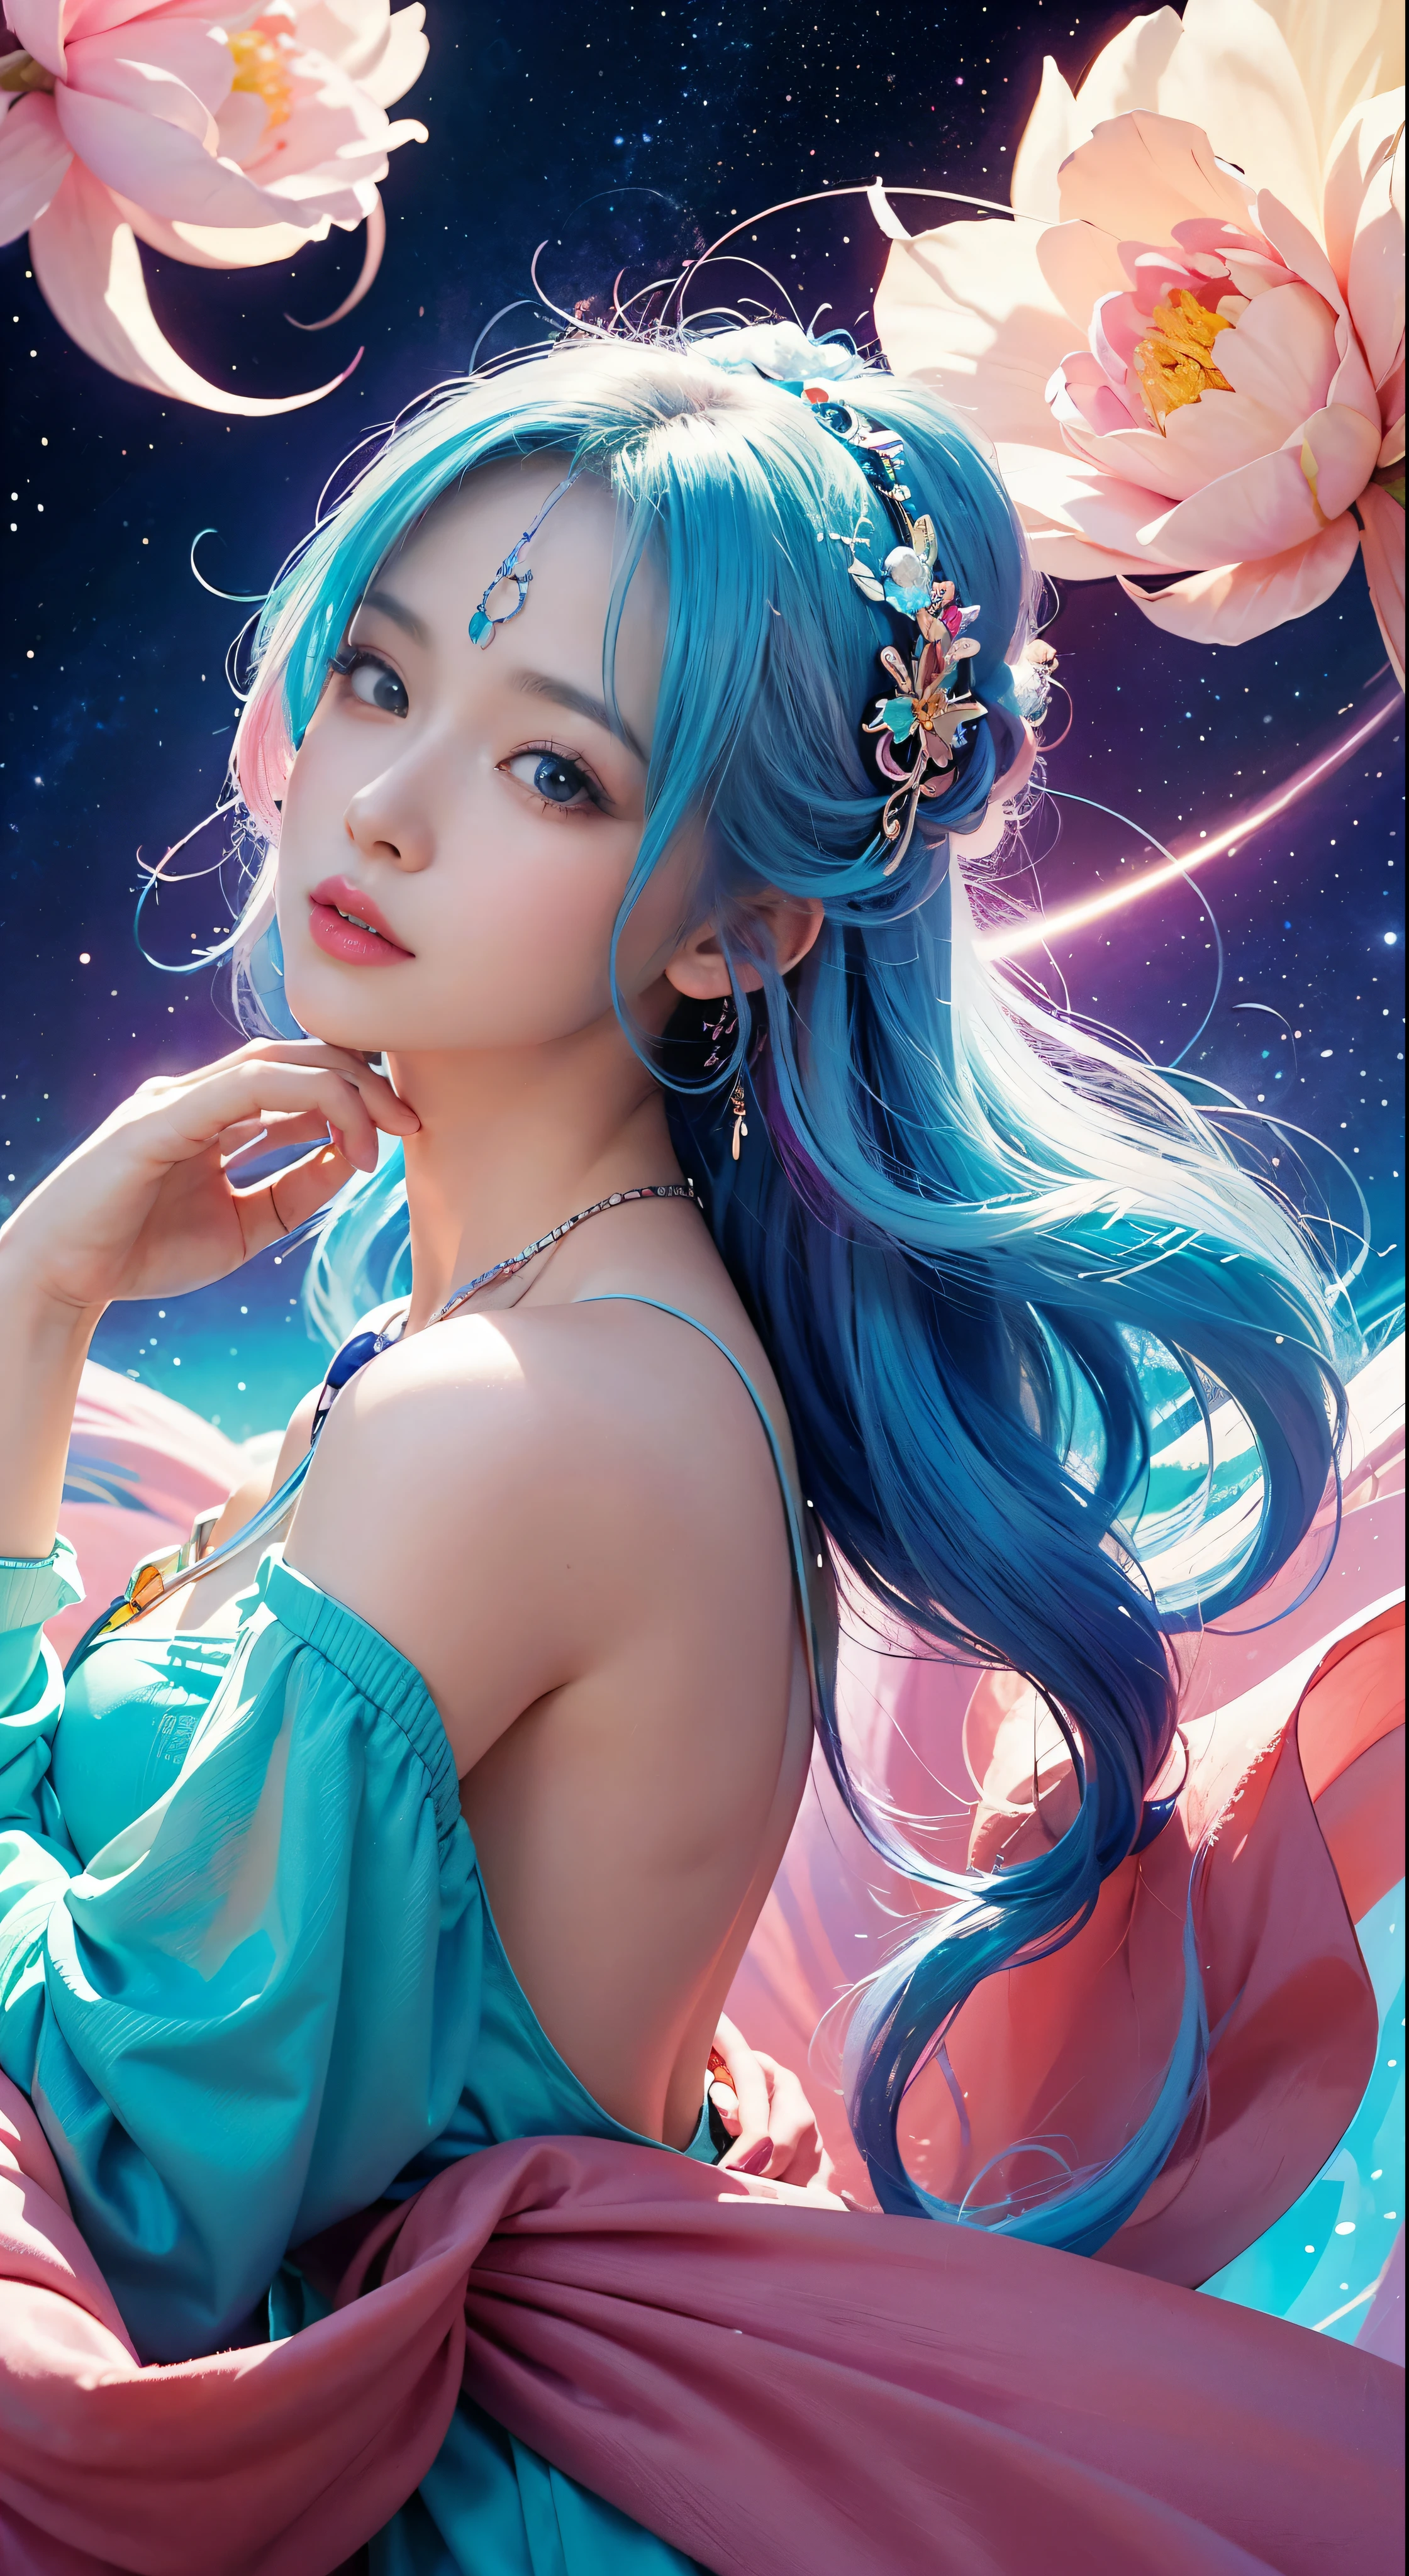 Close-up of a woman with colorful hair and necklace, anime girl with cosmic hair, Rossdraws' soft vitality, Gouvez style artwork, fantasy art style, colorful], vibrant fantasy style, Rossdraws cartoon full of vitality, cosmic and colorful, Guweiz, colorful digital fantasy art, stunning art style, beautiful anime style, white skin, subtle